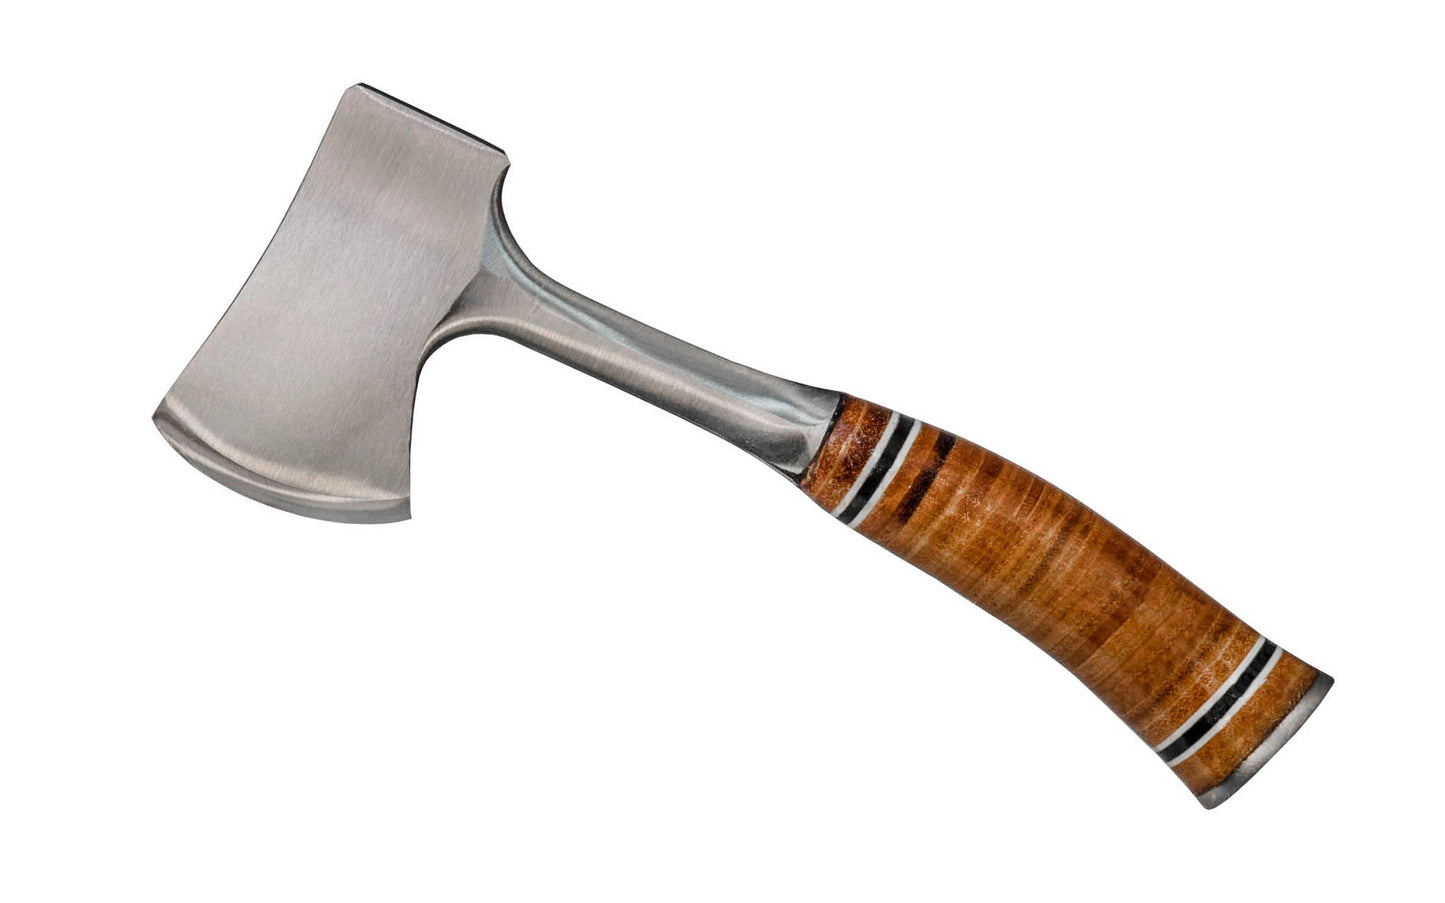 The Estwing Sportsman's Hatchet Axe is all steel-construction, all one-forged piece from the head through handle. Model #E14A & #E24A. Made in the USA.